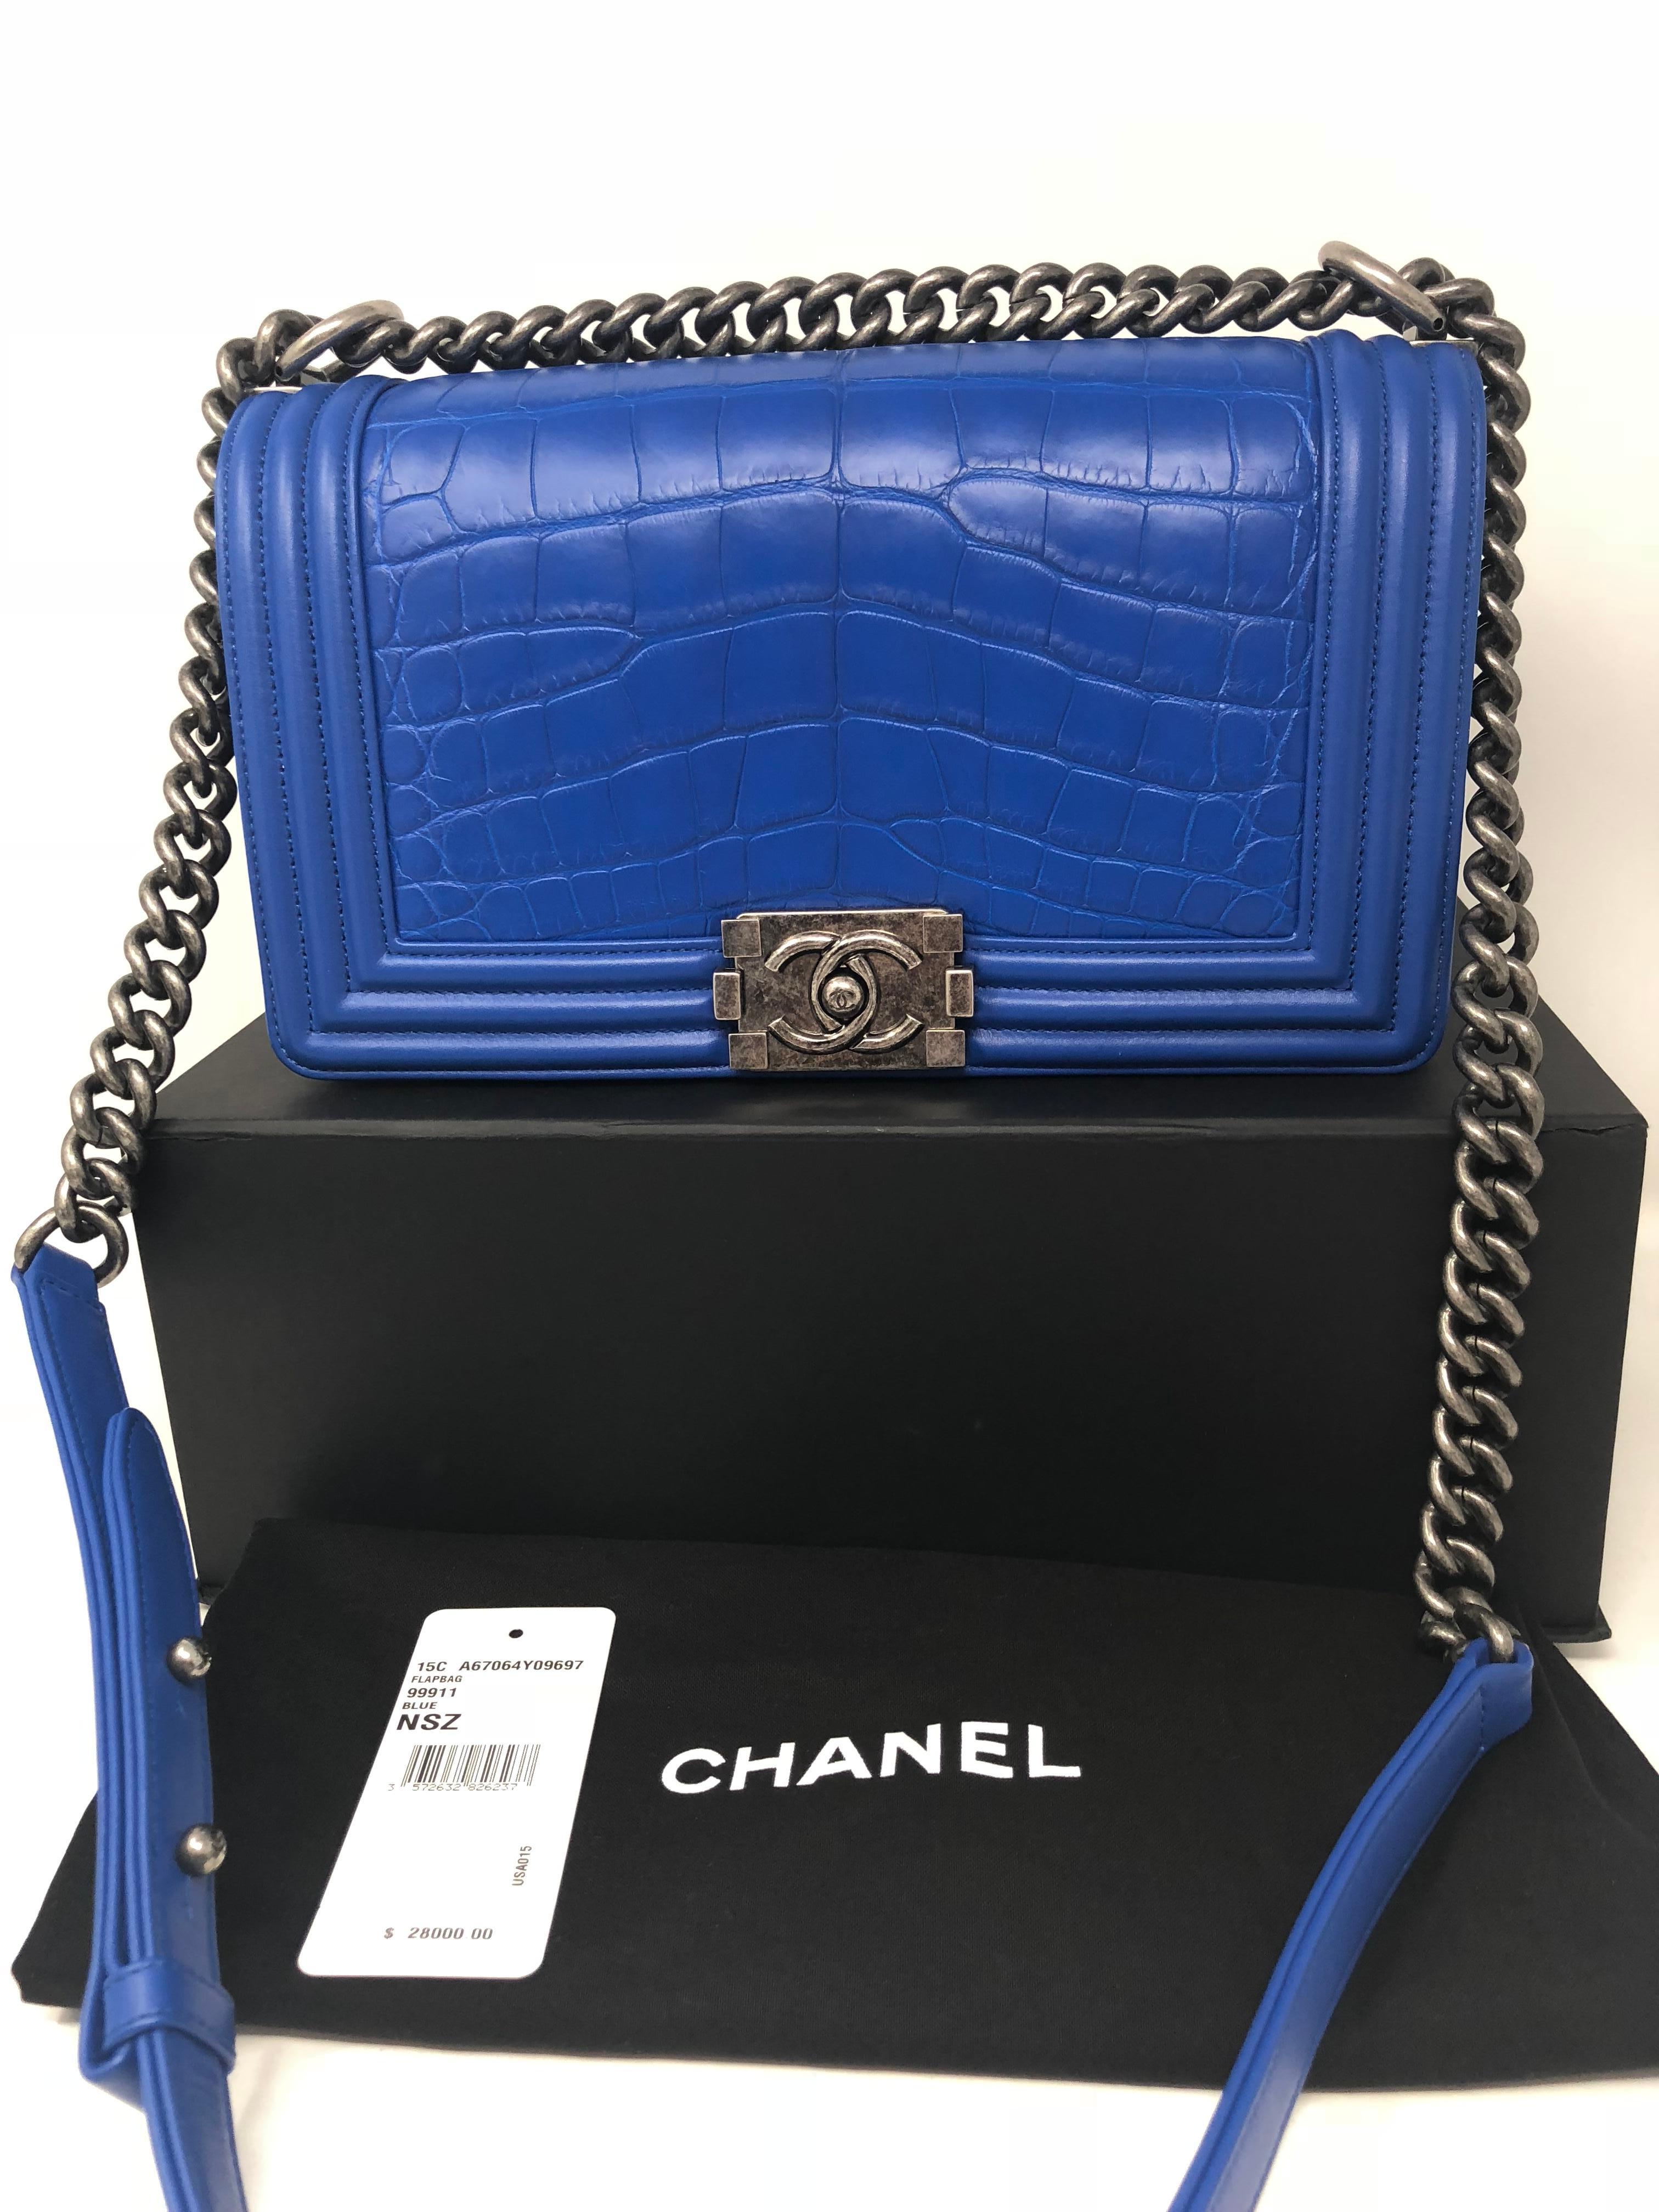 Chanel Alligator Boy Bag in electric blue color. Medium size Boy Bag is brand new condition. It was never used.  From 2015-2016 . Only a handful of these exotic skin bags out there. The original tag, dust cover, box and authenticity card is